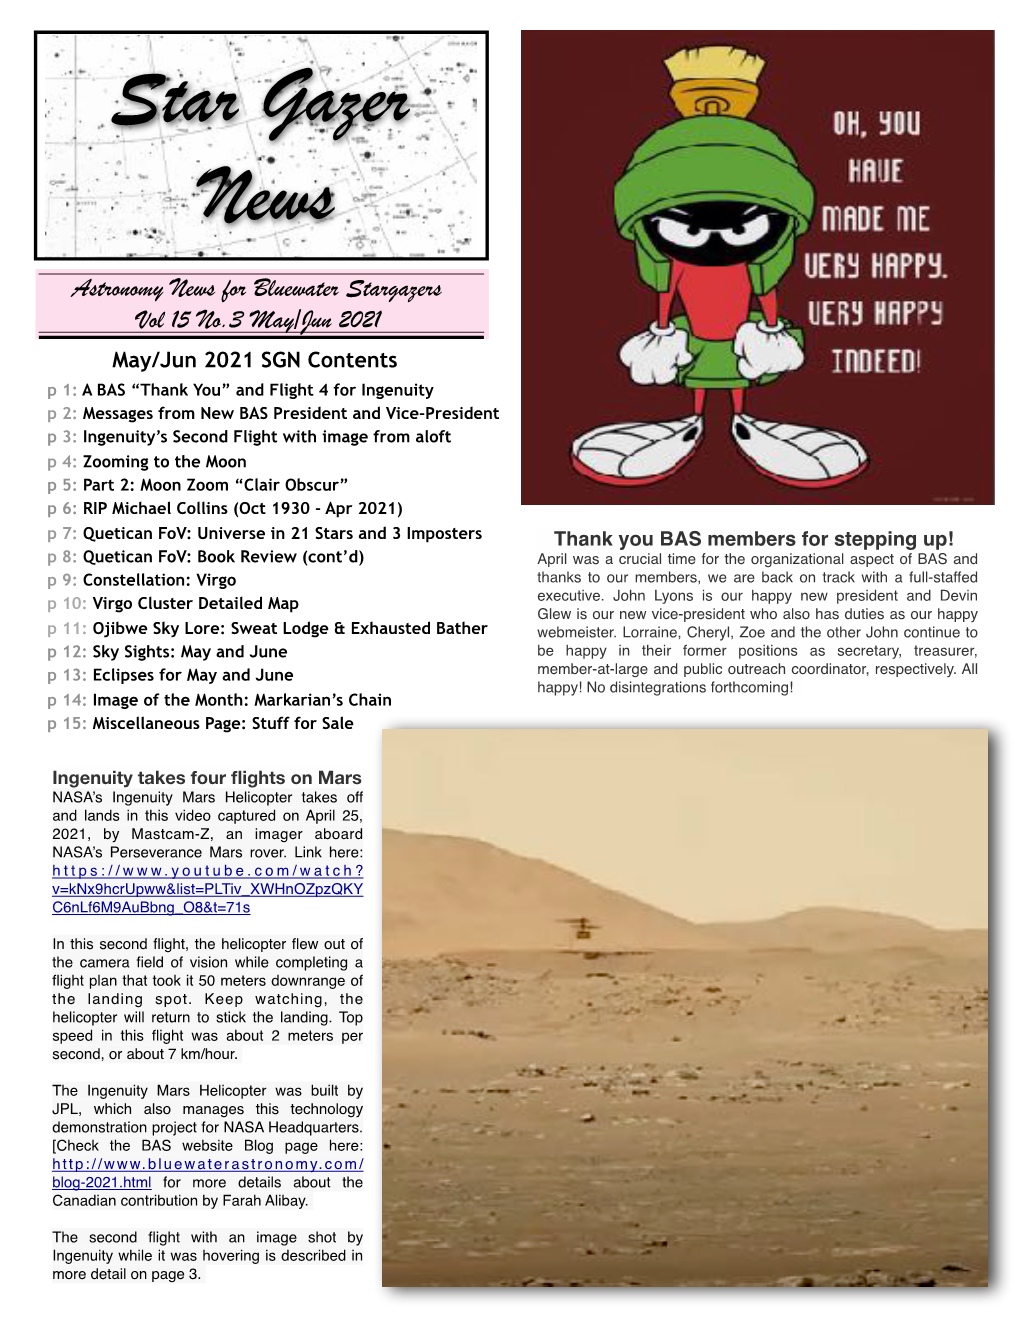 Astronomy News for Bluewater Stargazers Vol 15 No.3 May/Jun 2021